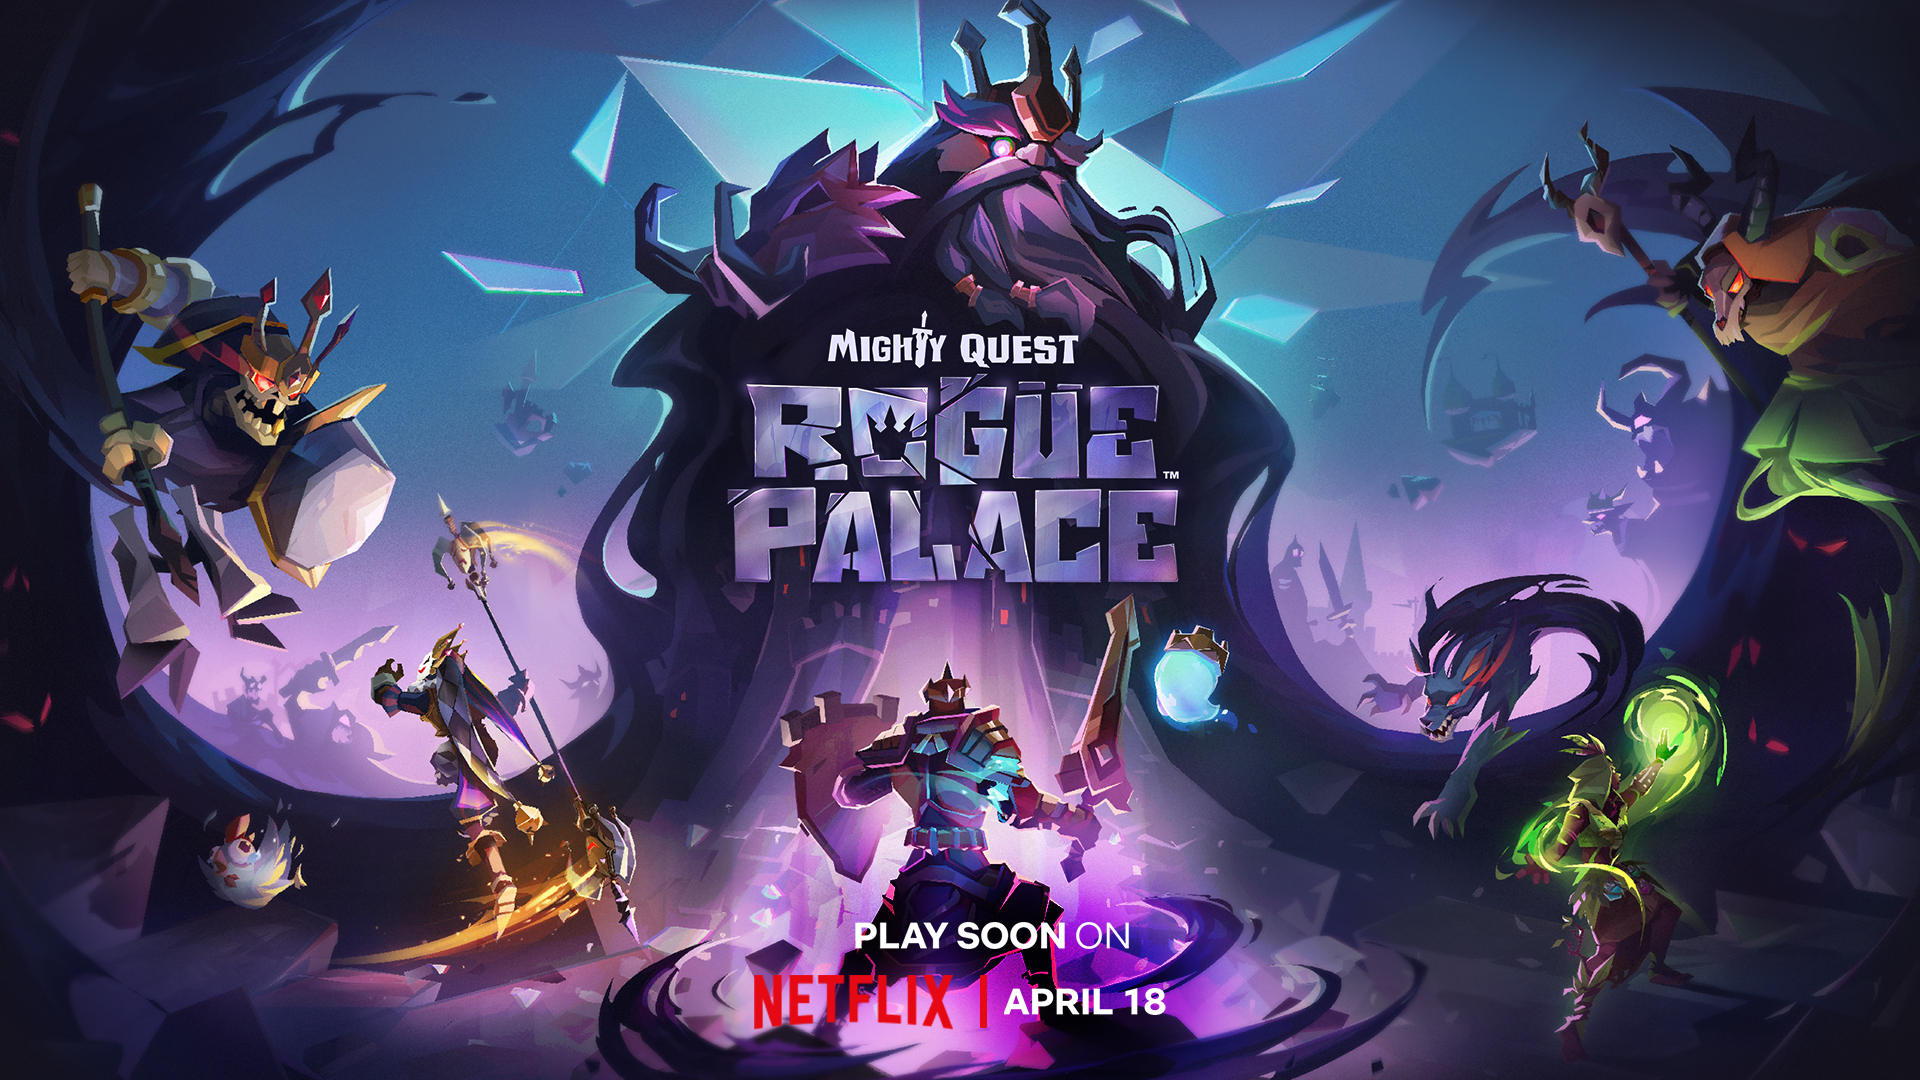 Netflix’s Next Exclusive Game, Ubisoft’s Mighty Quest Rogue Palace, Launches Today